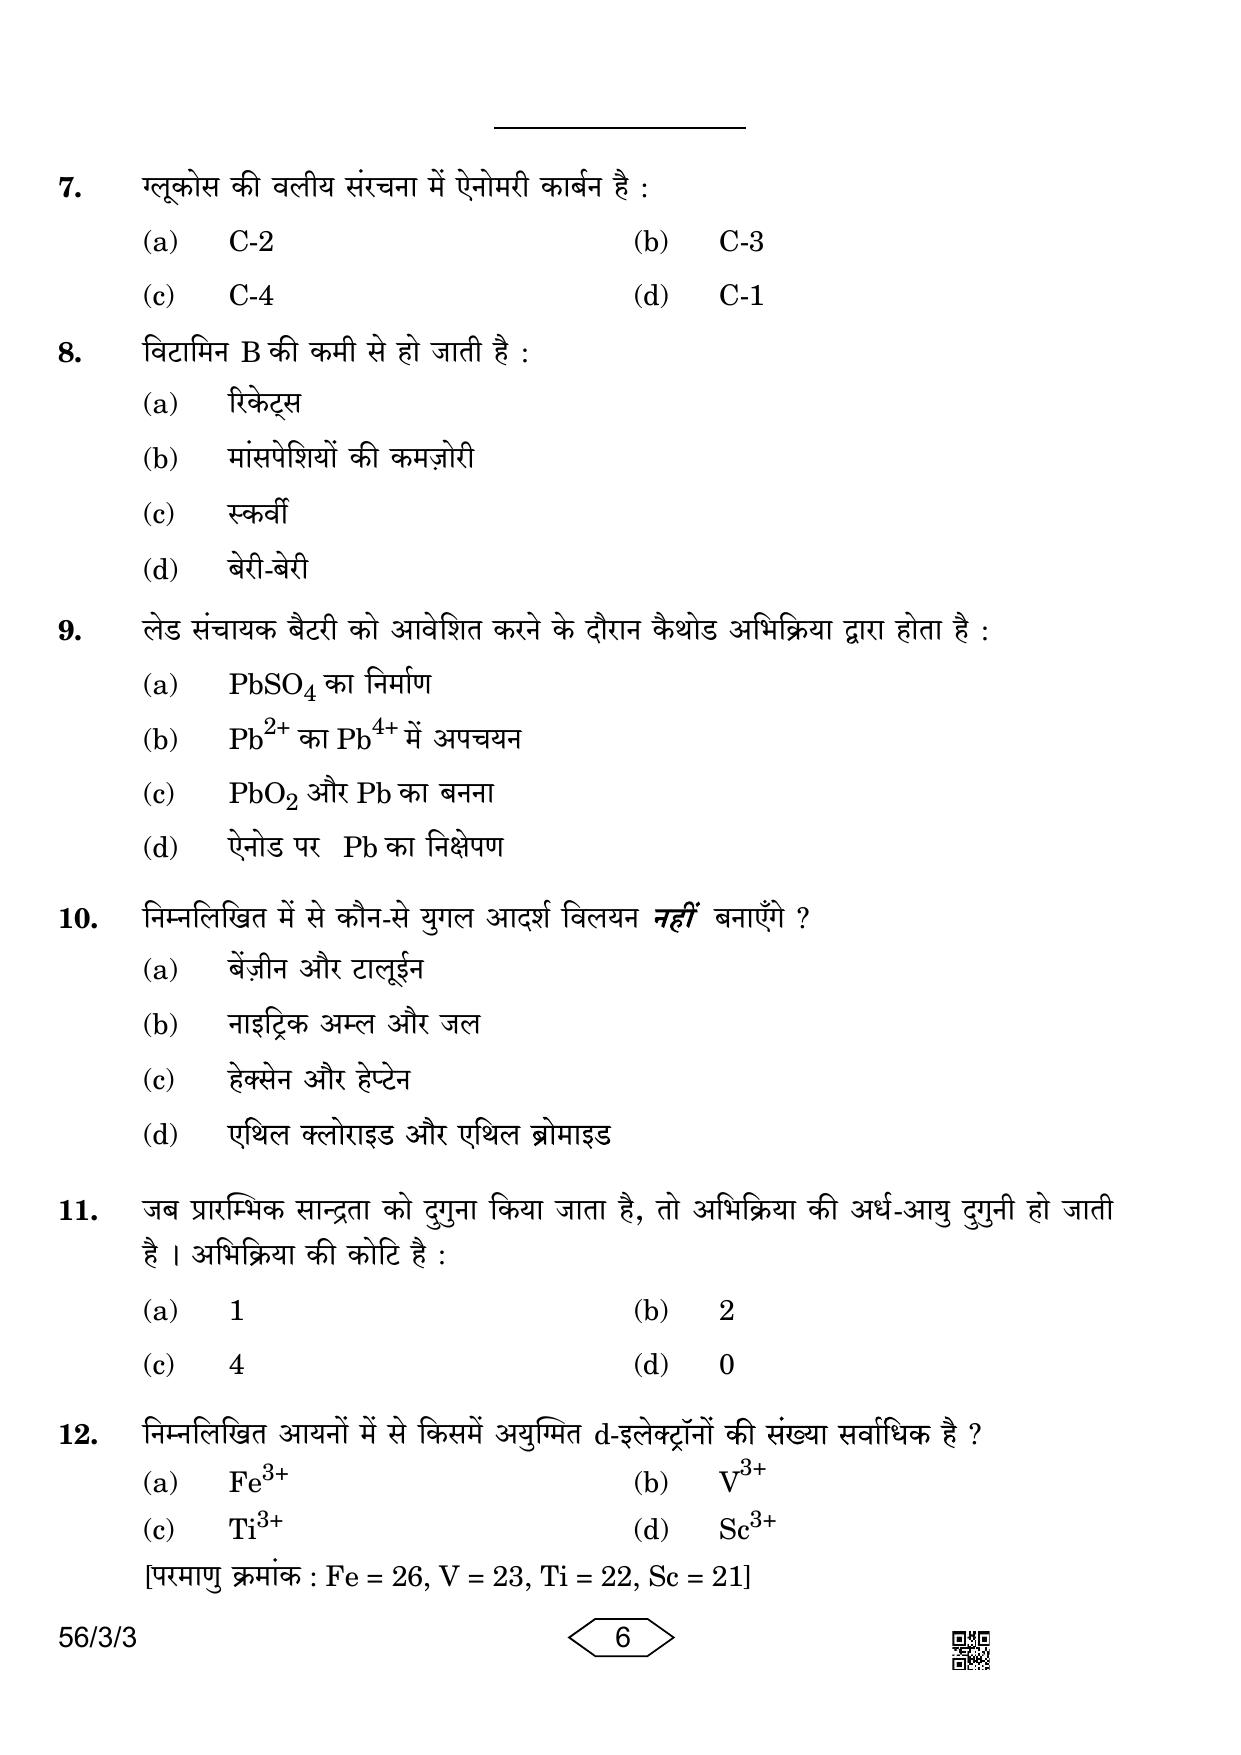 CBSE Class 12 56-3-3 Chemistry 2023 Question Paper - Page 6